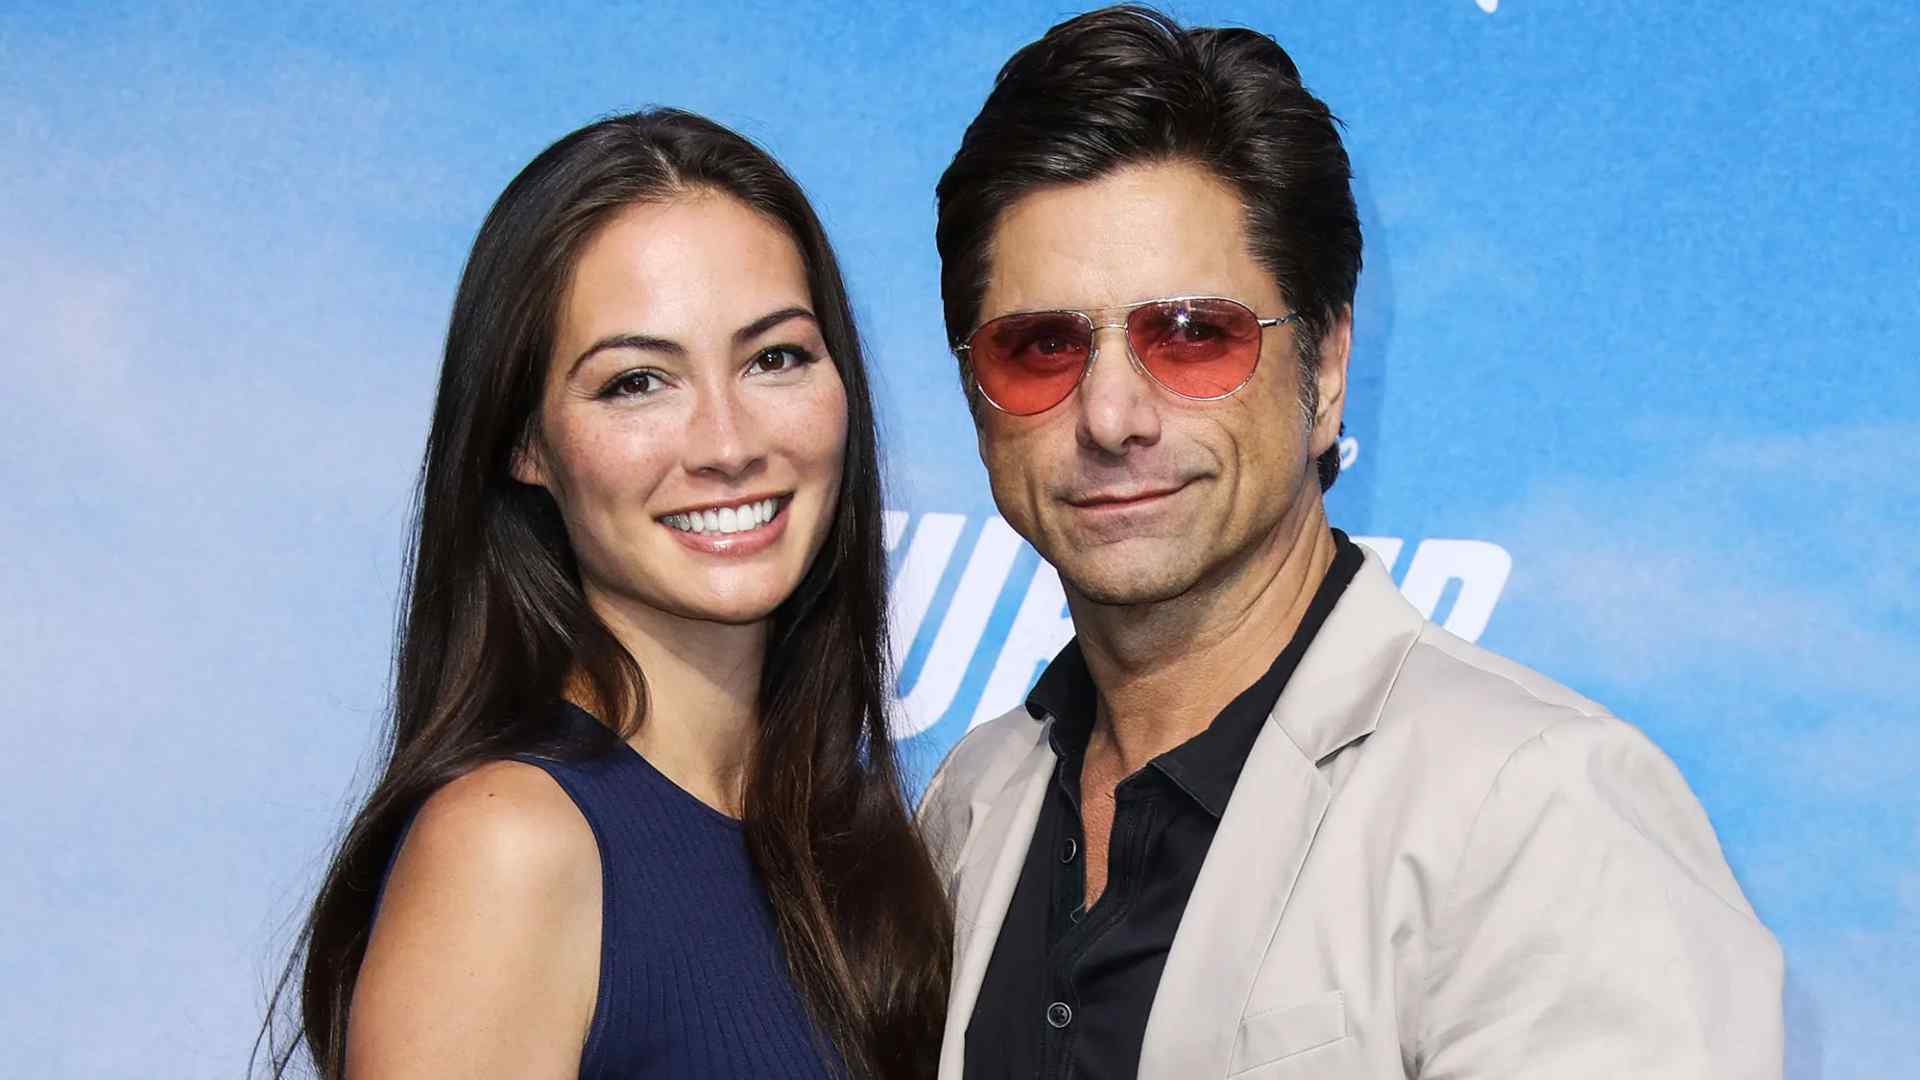 John Stamos and Caitlin McHugh dated for a year before they got engaged in 2017 at Disneyland